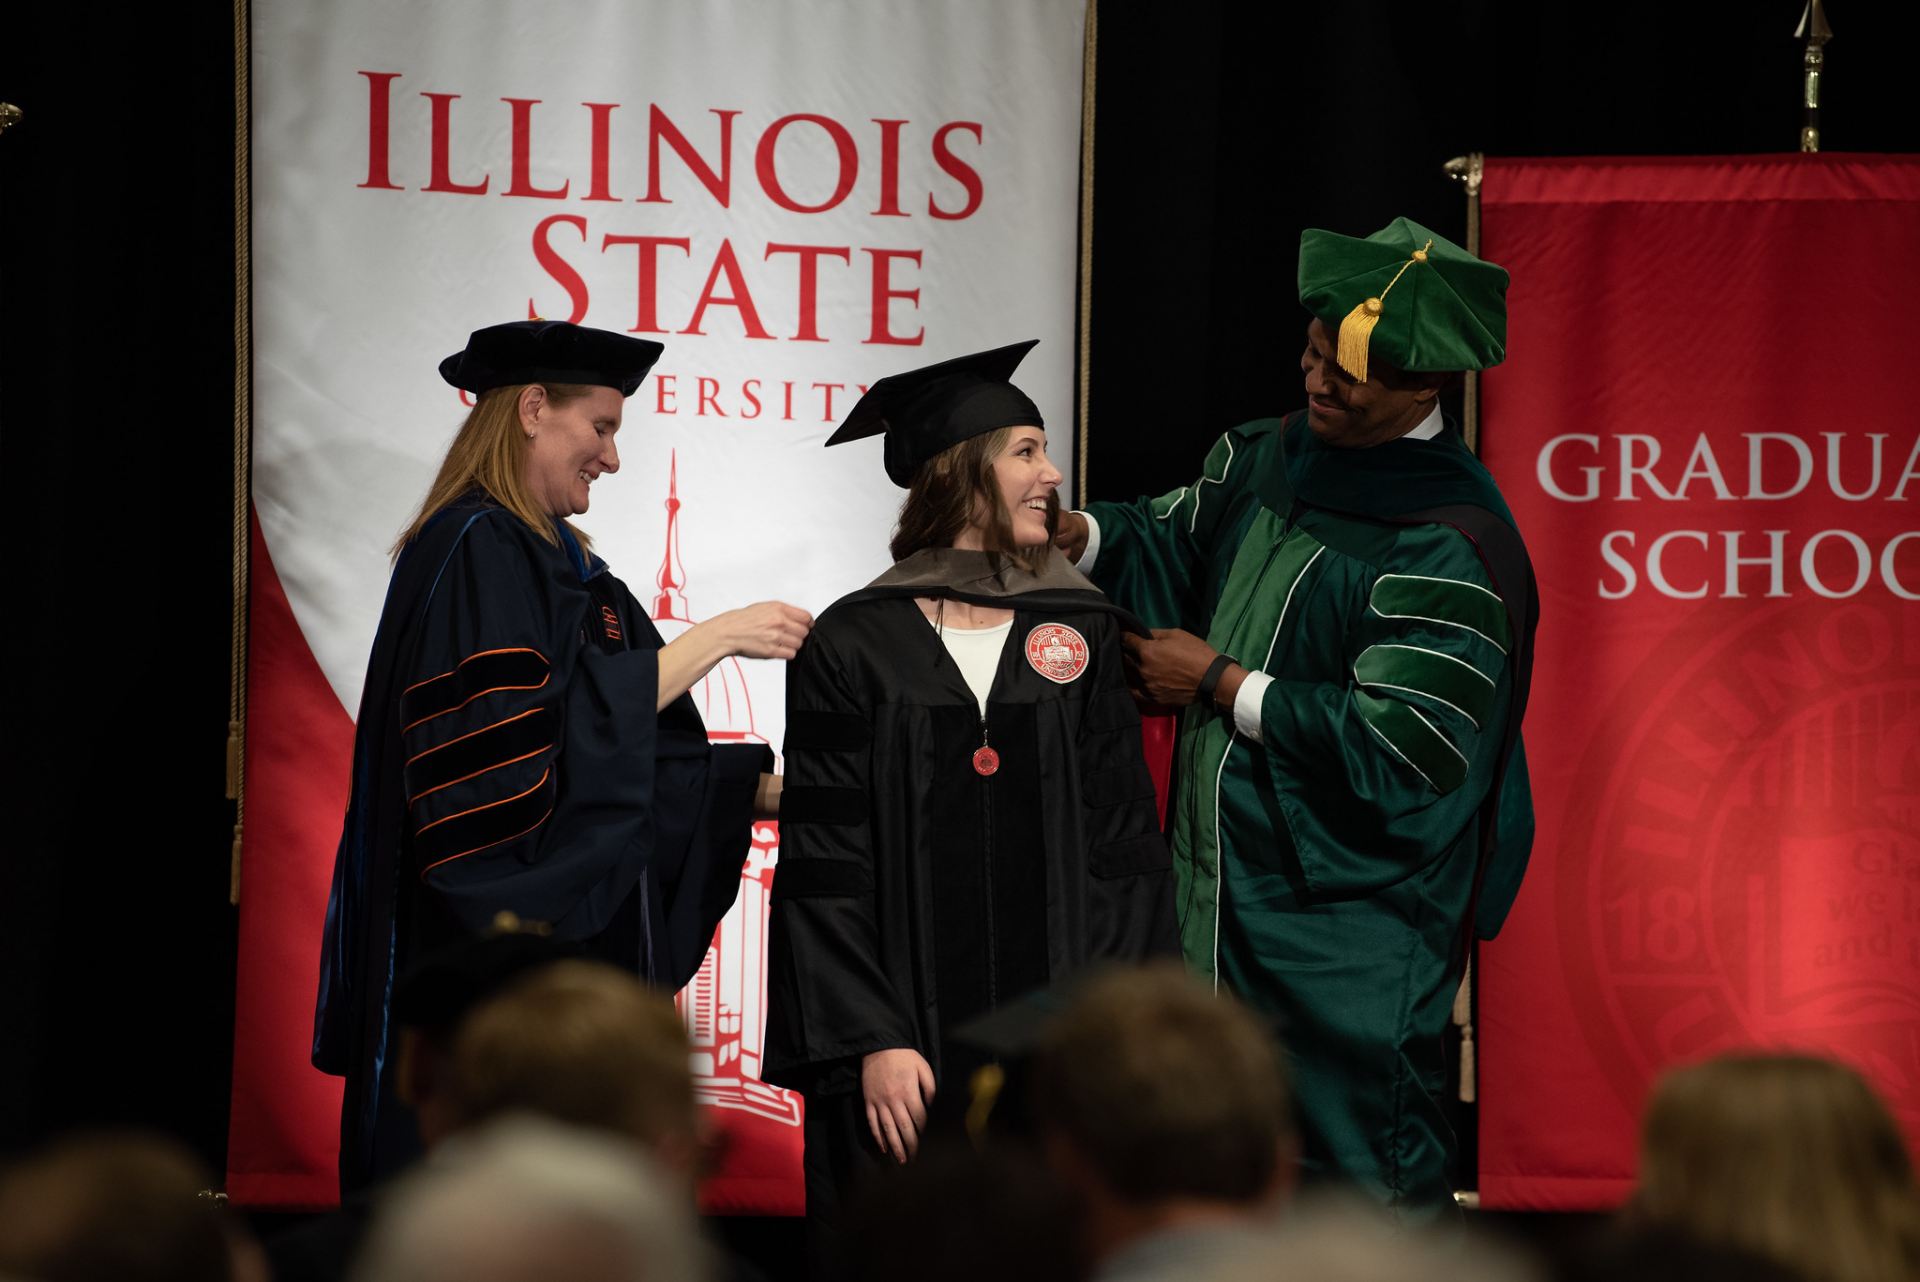 Two people putting a sash on a graduate on stage.